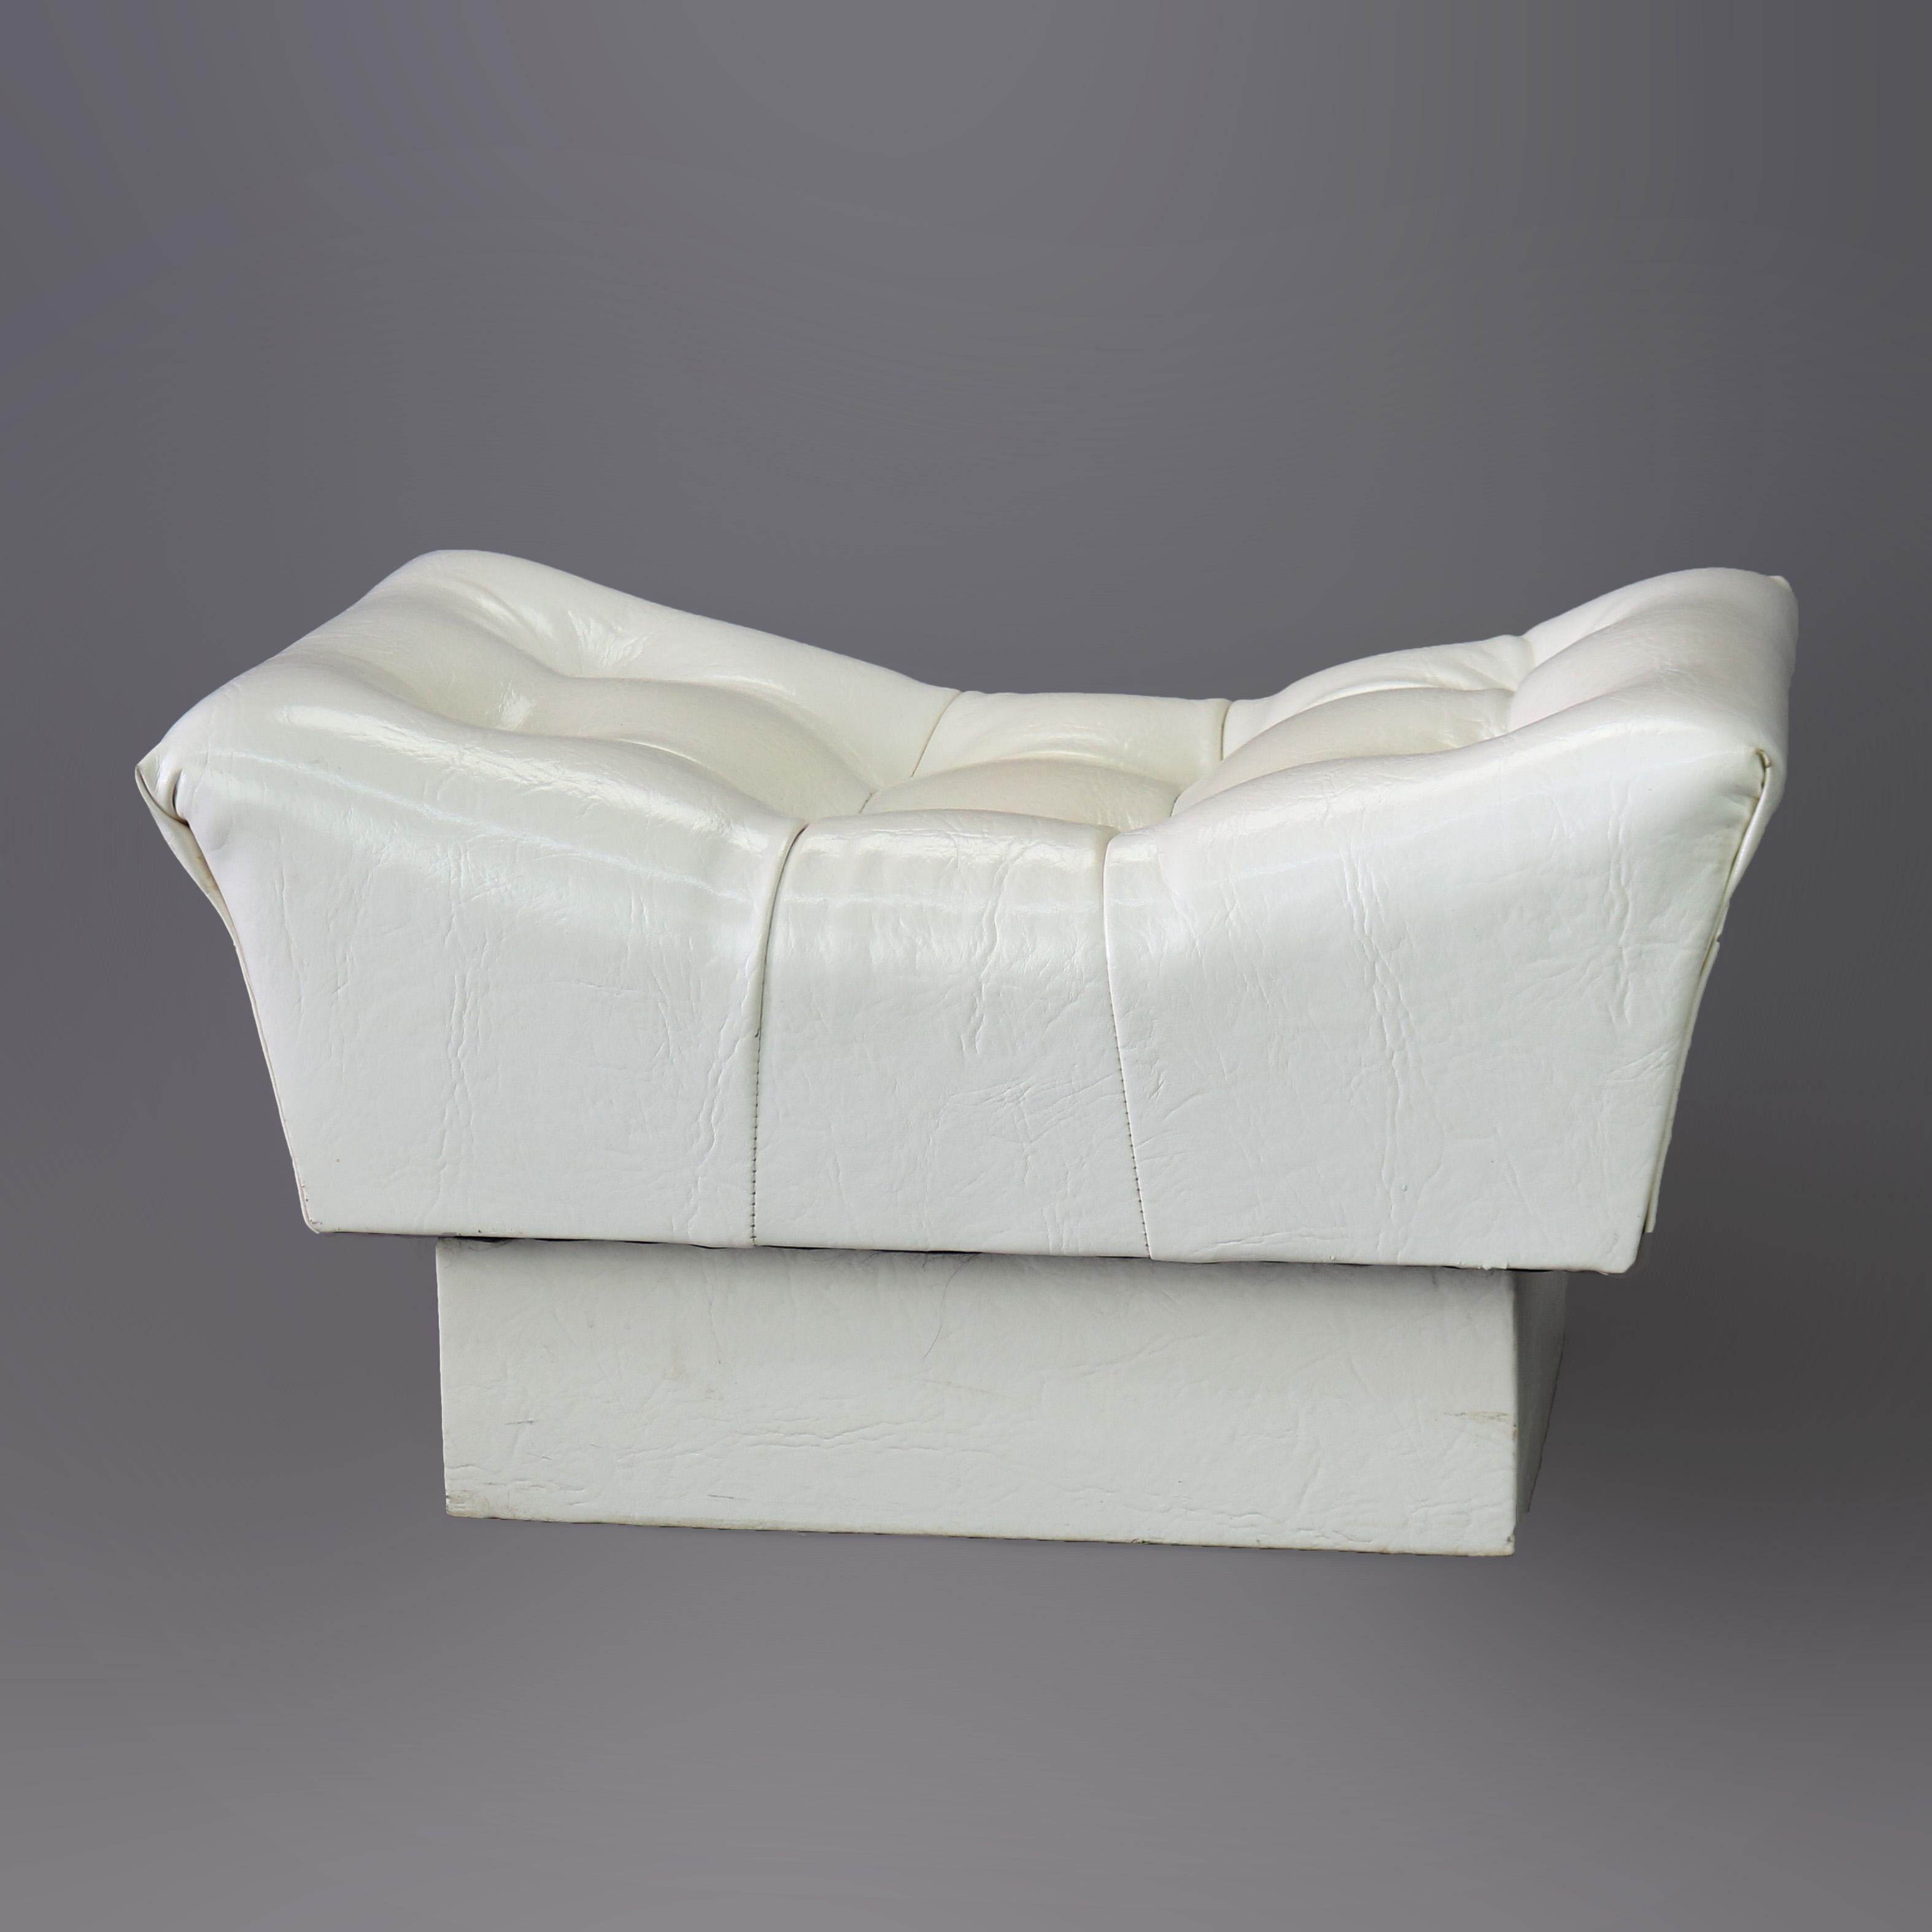 A Mid-Century Modern footstool offers scooped form with tufted white leather upholstery and raised on stepped base, 20th century

Measures- 15.5'' H x 28'' W x 19.75'' D.